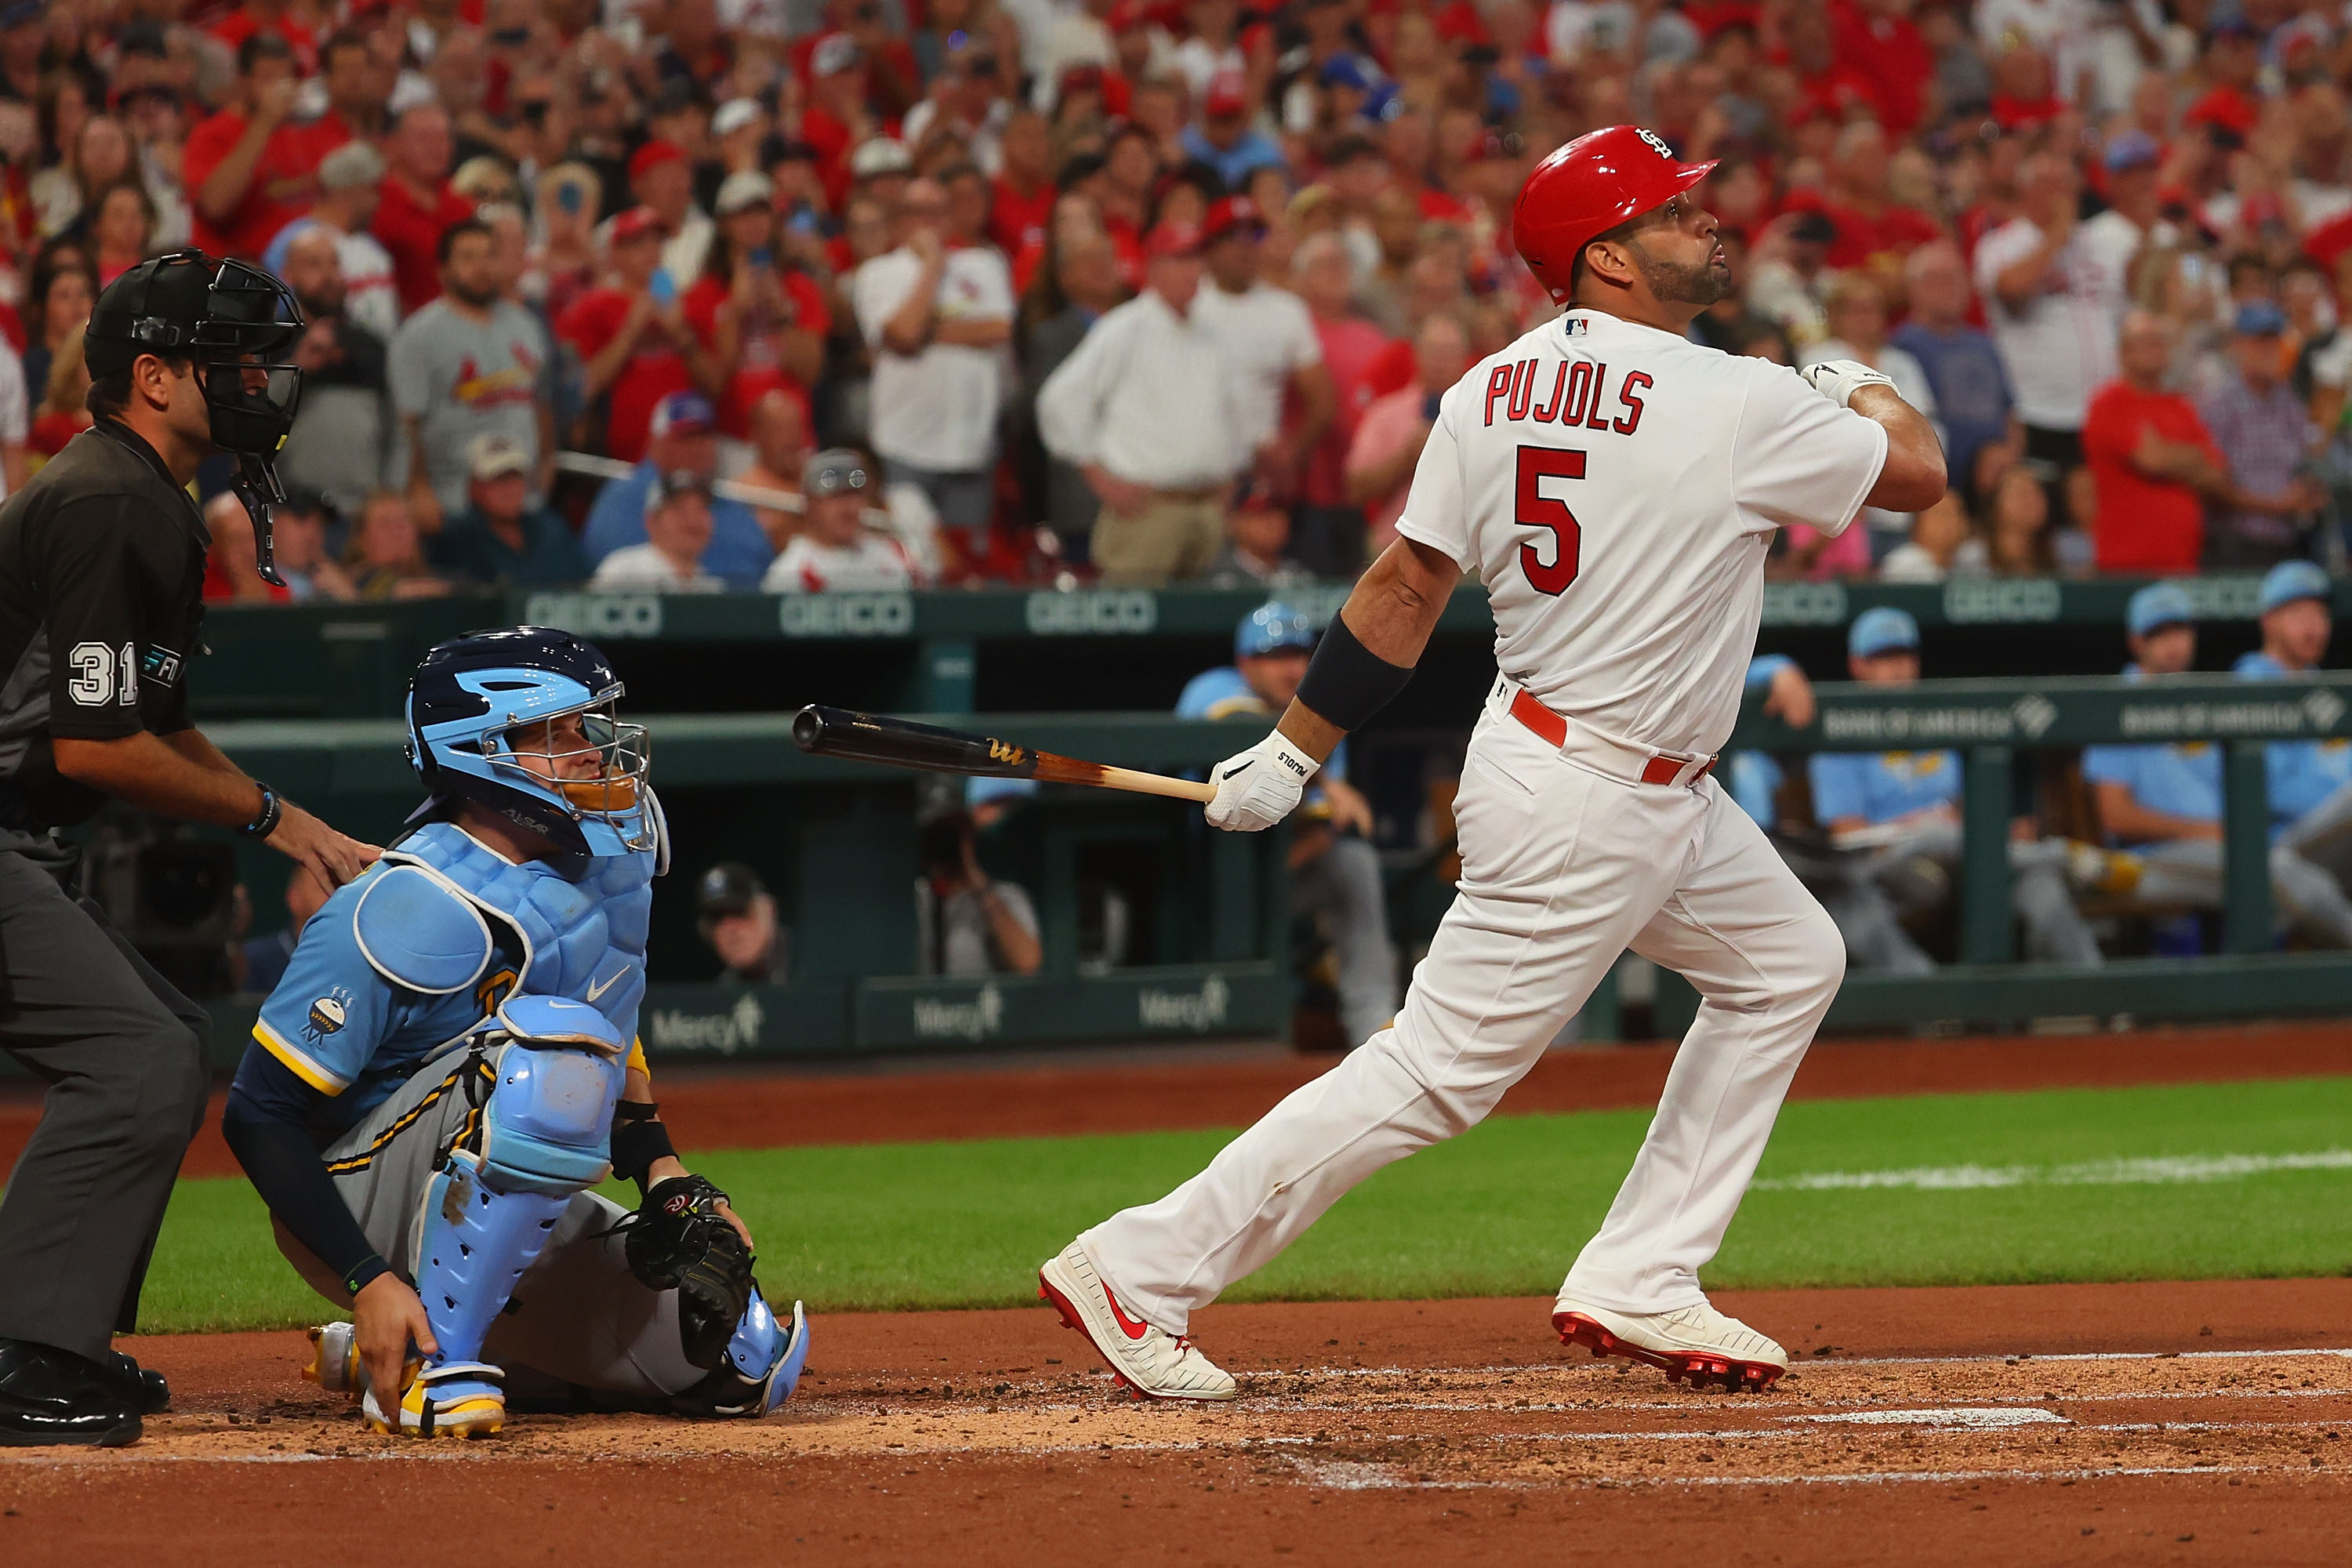 Albert Pujols #5 of the St. Louis Cardinals drives in a run with a single against the Milwaukee Brewers in the first inning at Busch Stadium on September 13, 2022 in St Louis, Missouri.